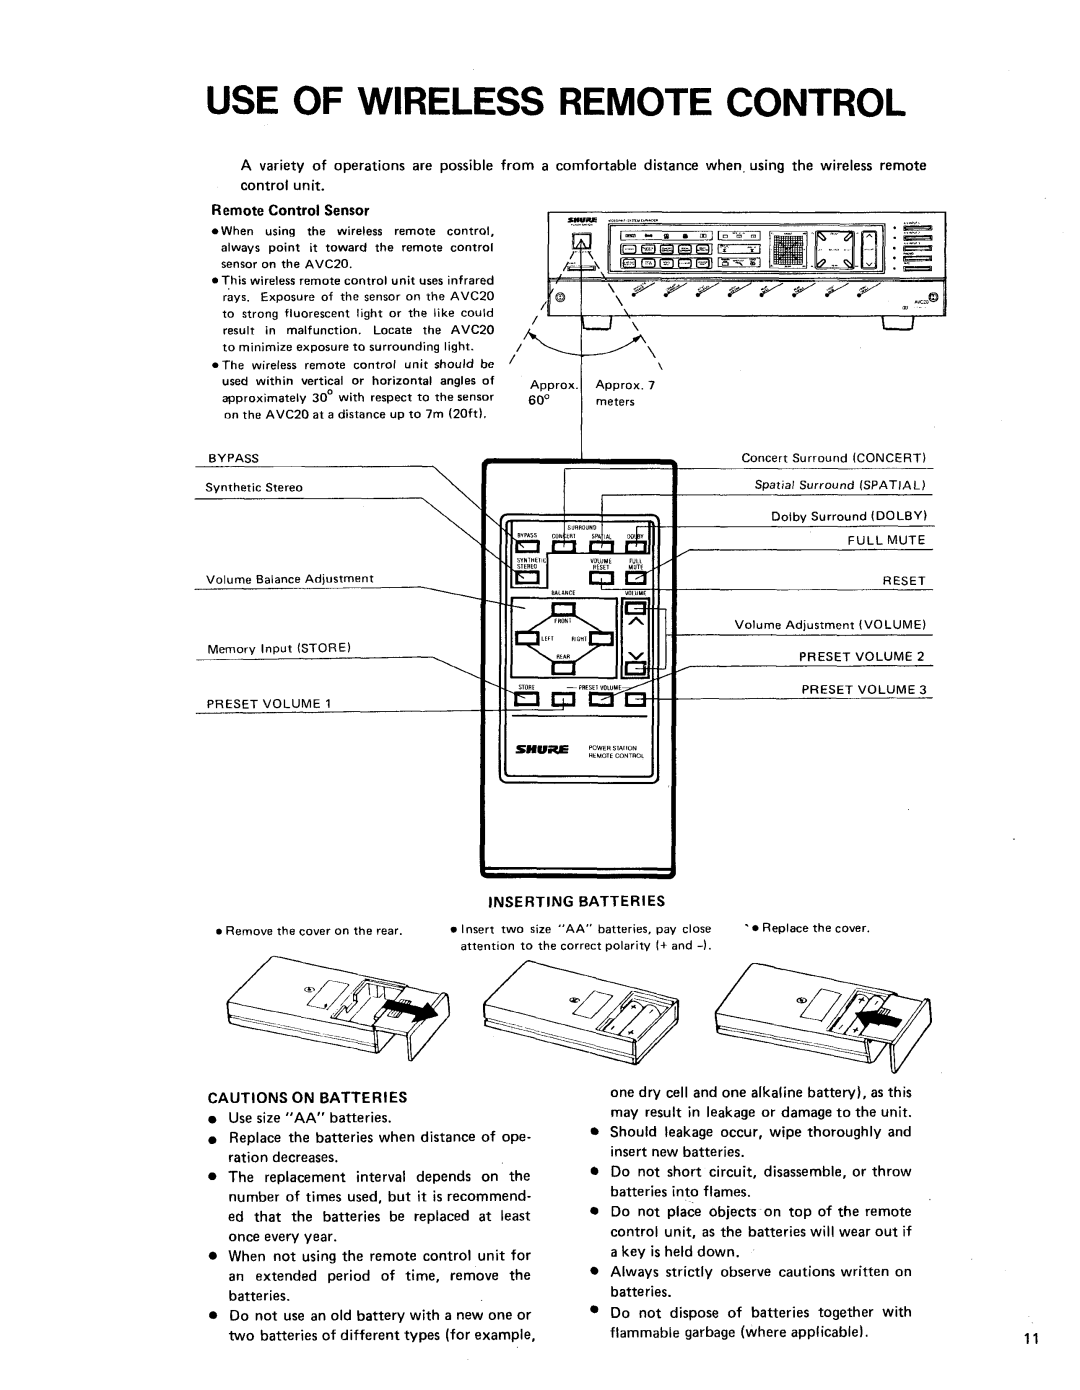 Shure AVC20 owner manual Use Of Wireless Remote Control 